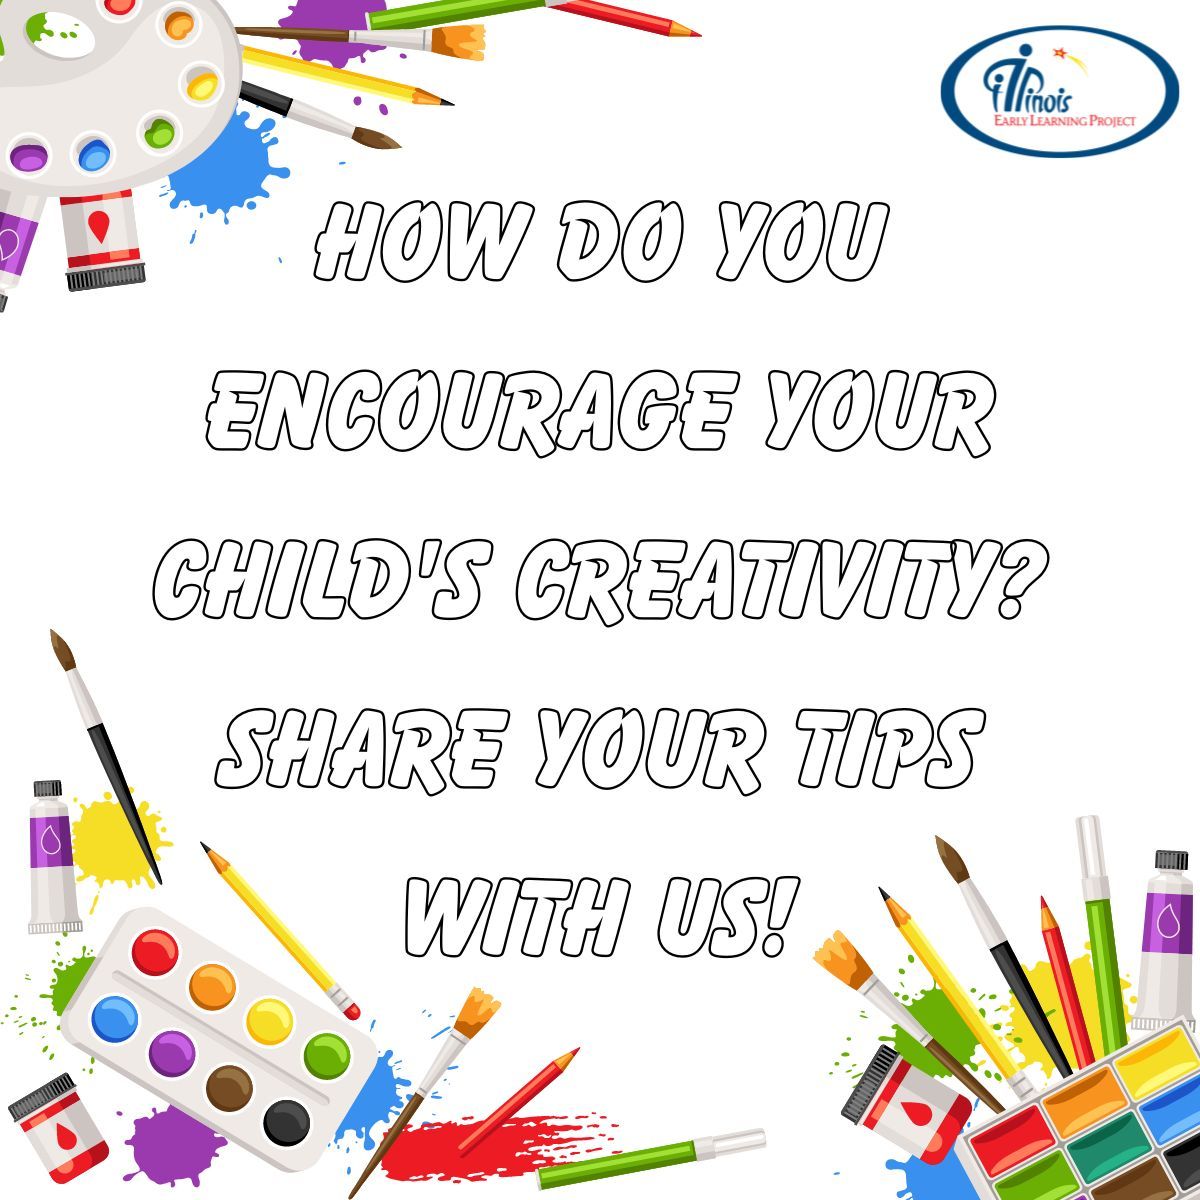 How do you encourage your child's creativity? Share your tips with us! 
#ChildDevelopment #IllinoisEarlyLearning